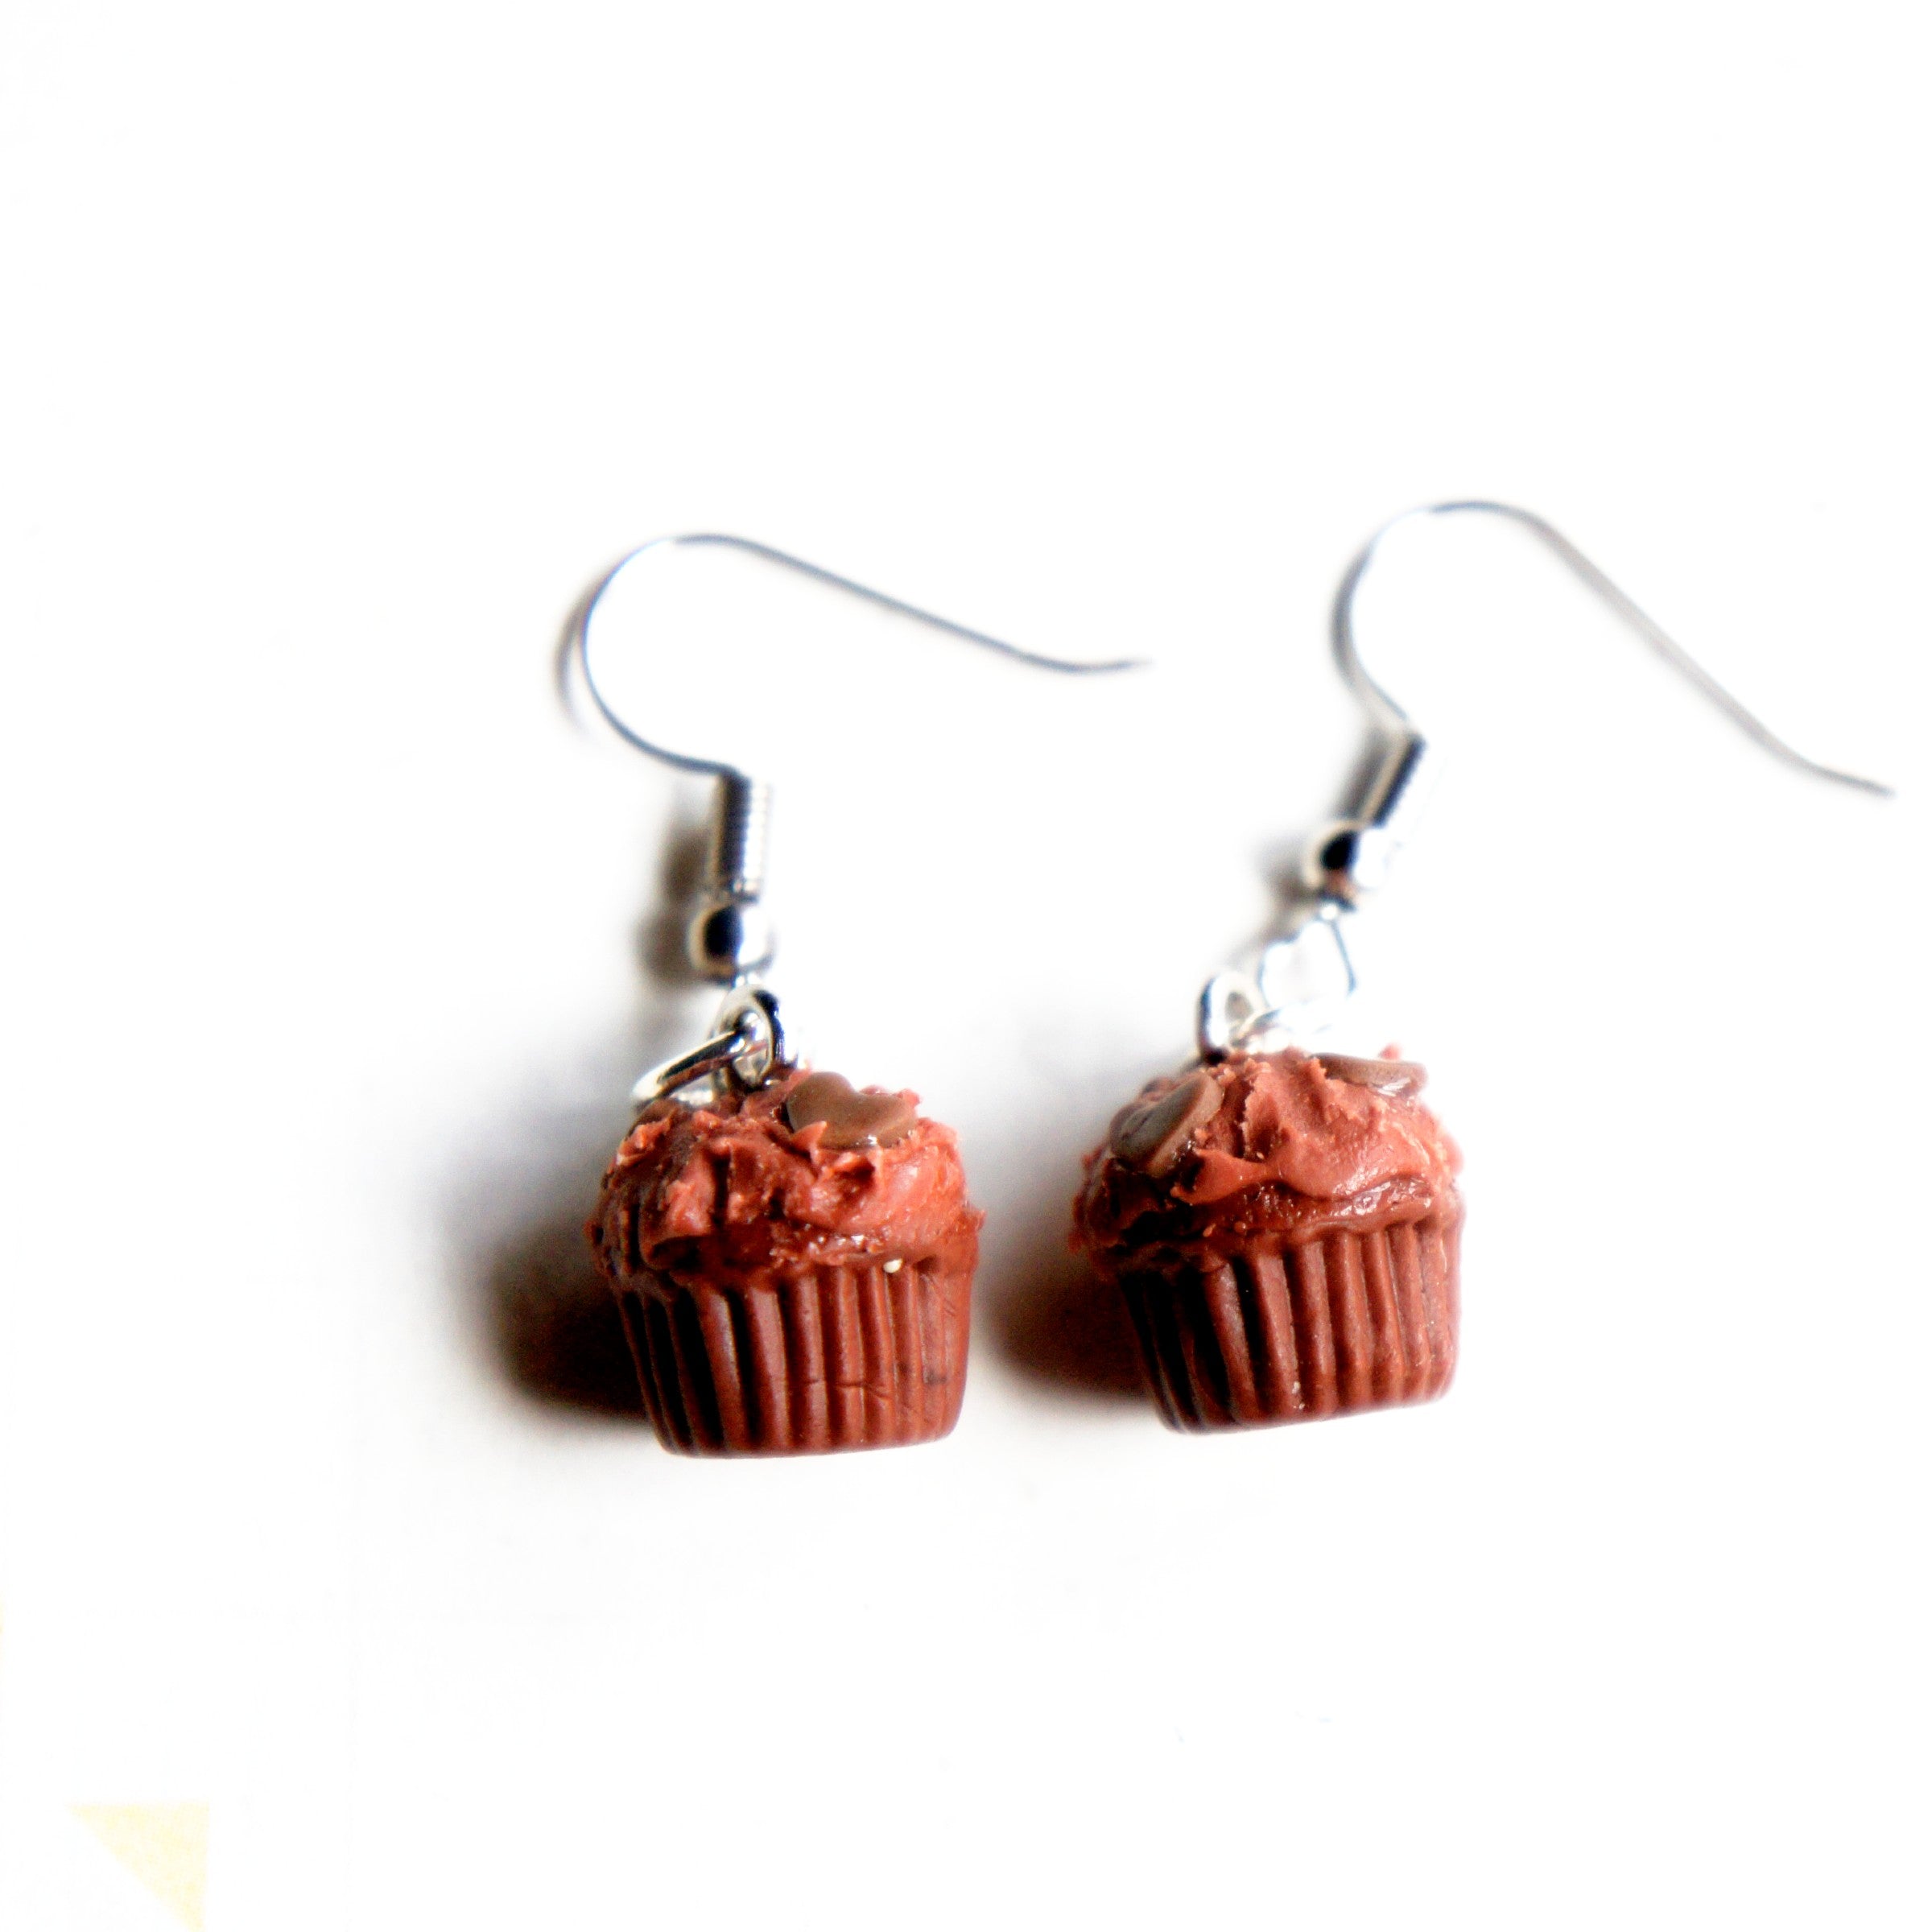 Chocolate Cupcakes Dangle Earrings - Jillicious charms and accessories